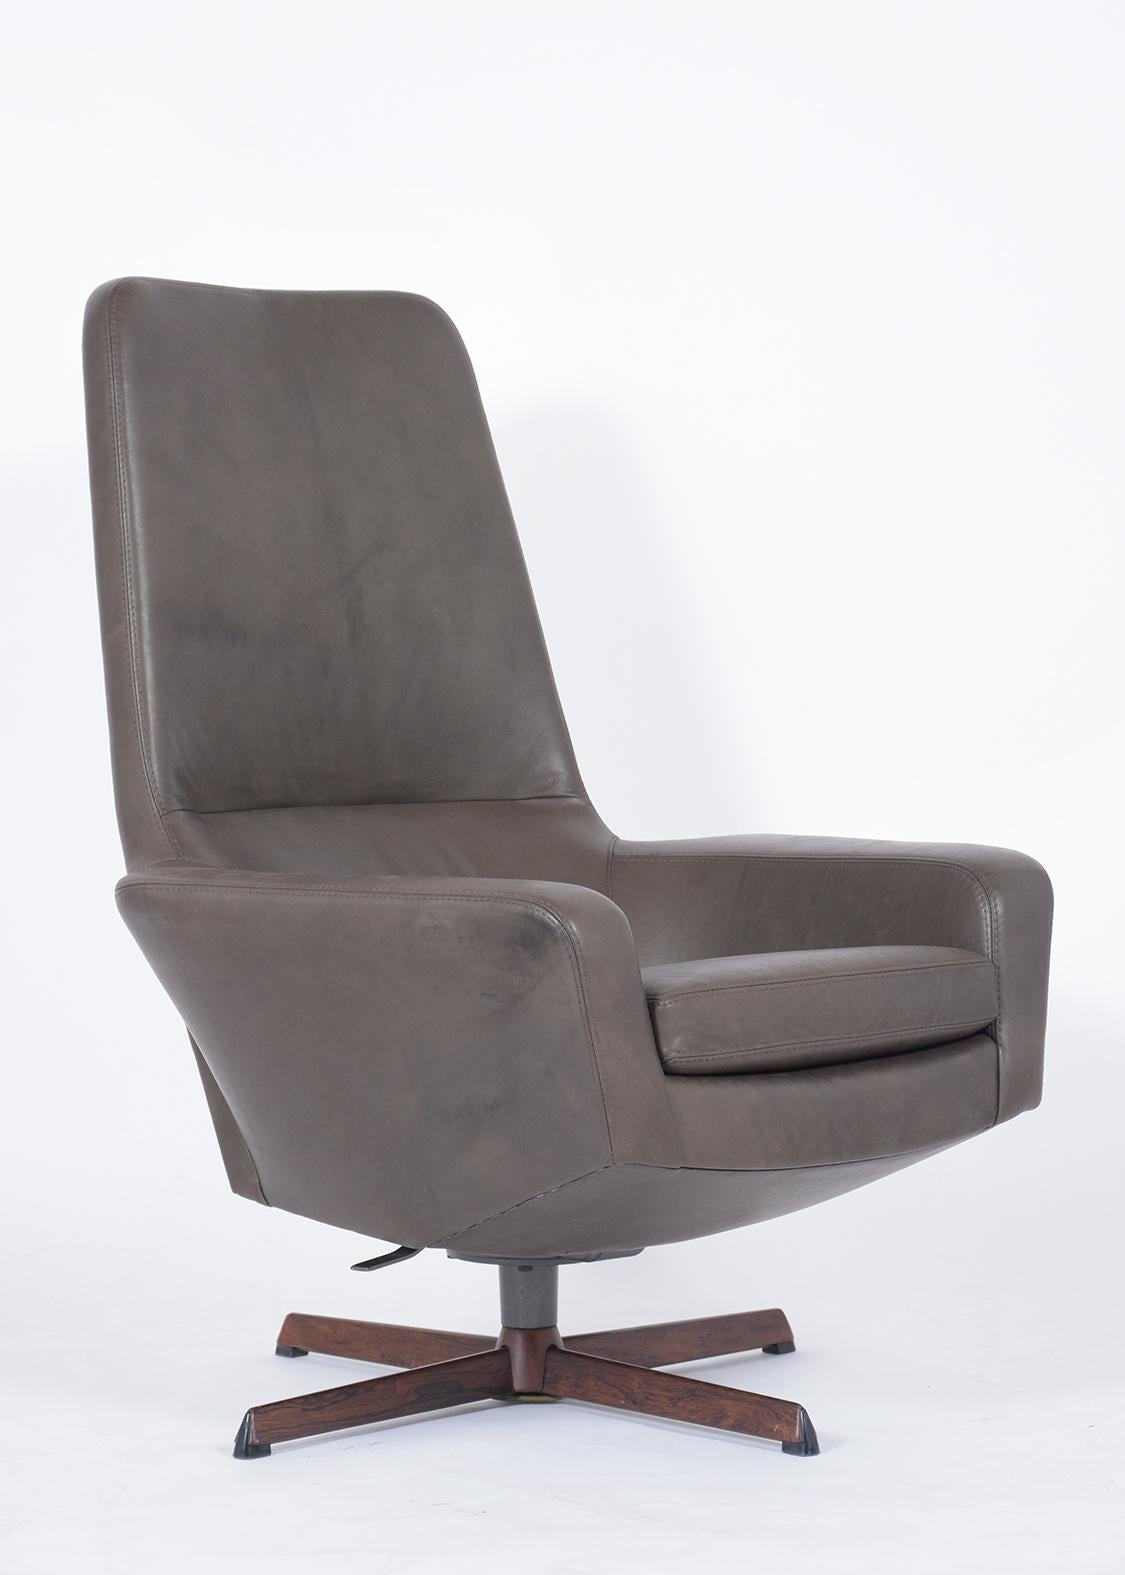 Mid-20th Century Restored Vintage Ib Kofod-Larsen Swivel Lounge Chair & Ottoman in Grey Leather For Sale